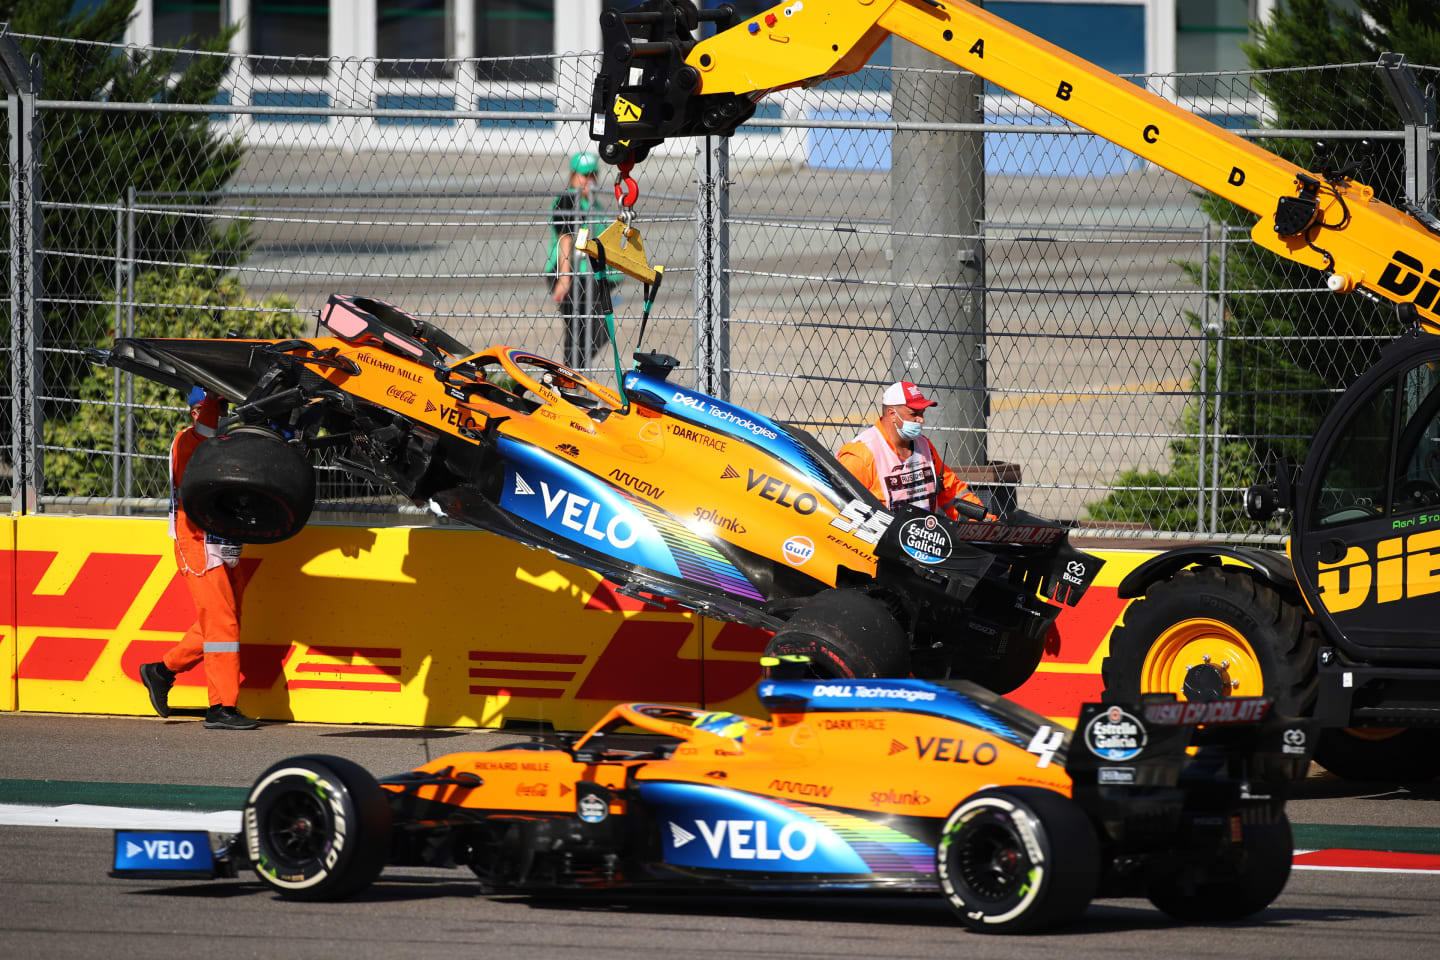 SOCHI, RUSSIA - SEPTEMBER 27: The car of Carlos Sainz of Spain and McLaren F1 is removed from the track after crashing on the first lap during the F1 Grand Prix of Russia at Sochi Autodrom on September 27, 2020 in Sochi, Russia. (Photo by Bryn Lennon/Getty Images)